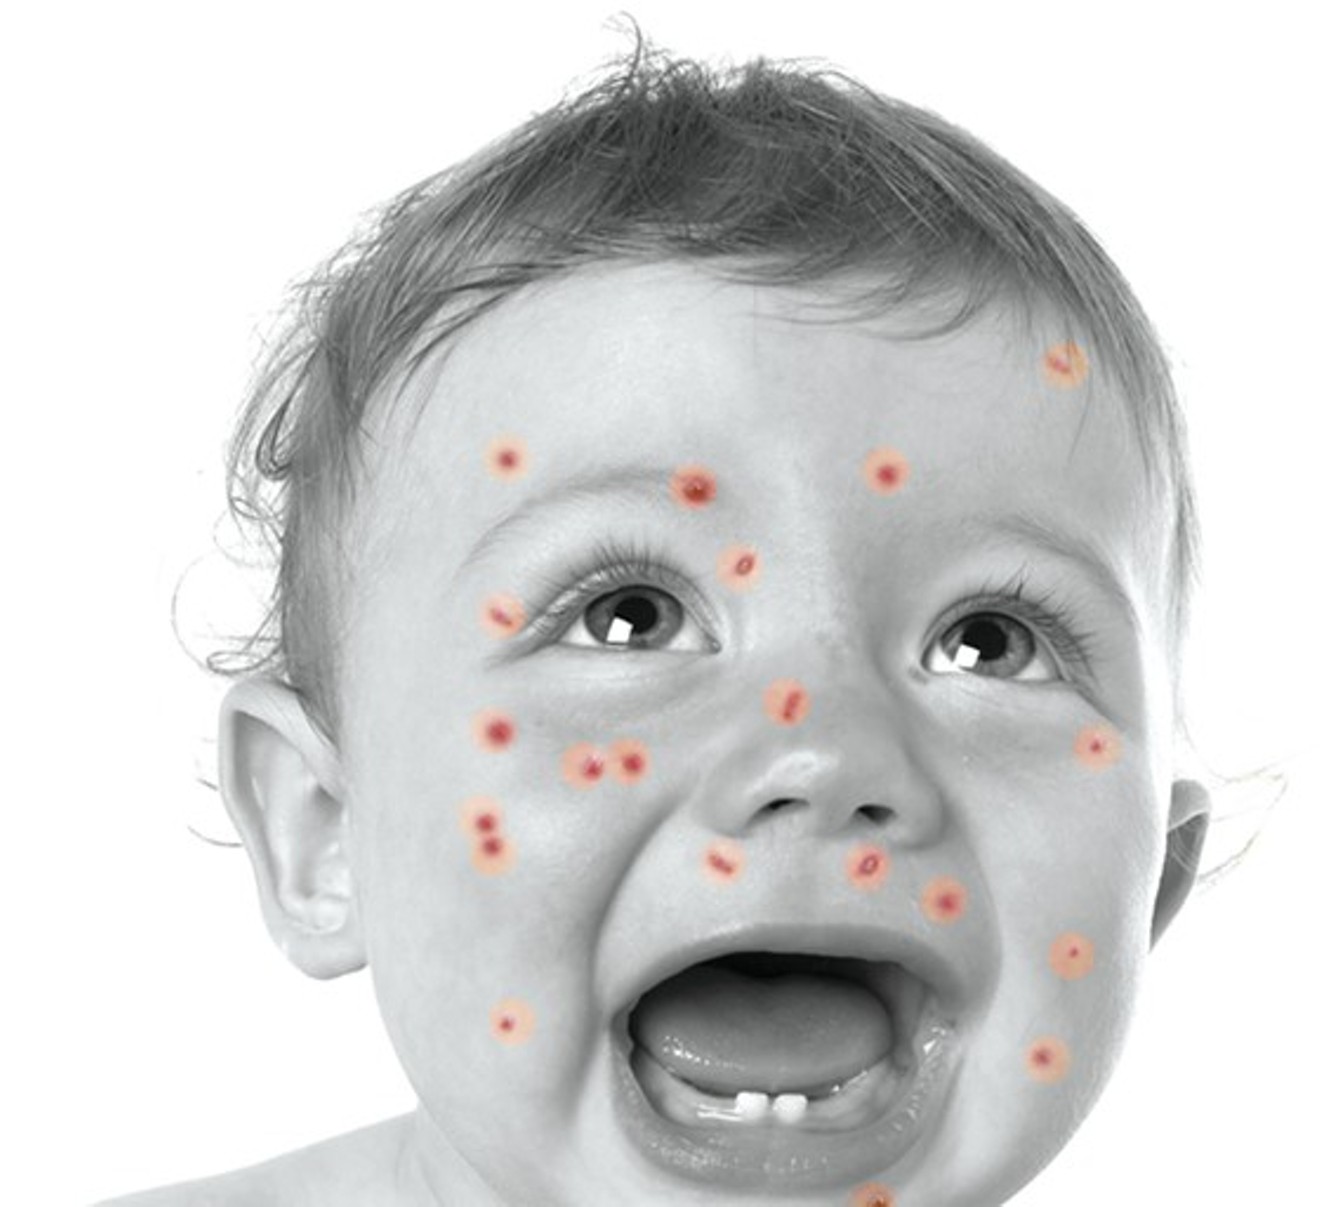 Measles isn't the worst that can happen.